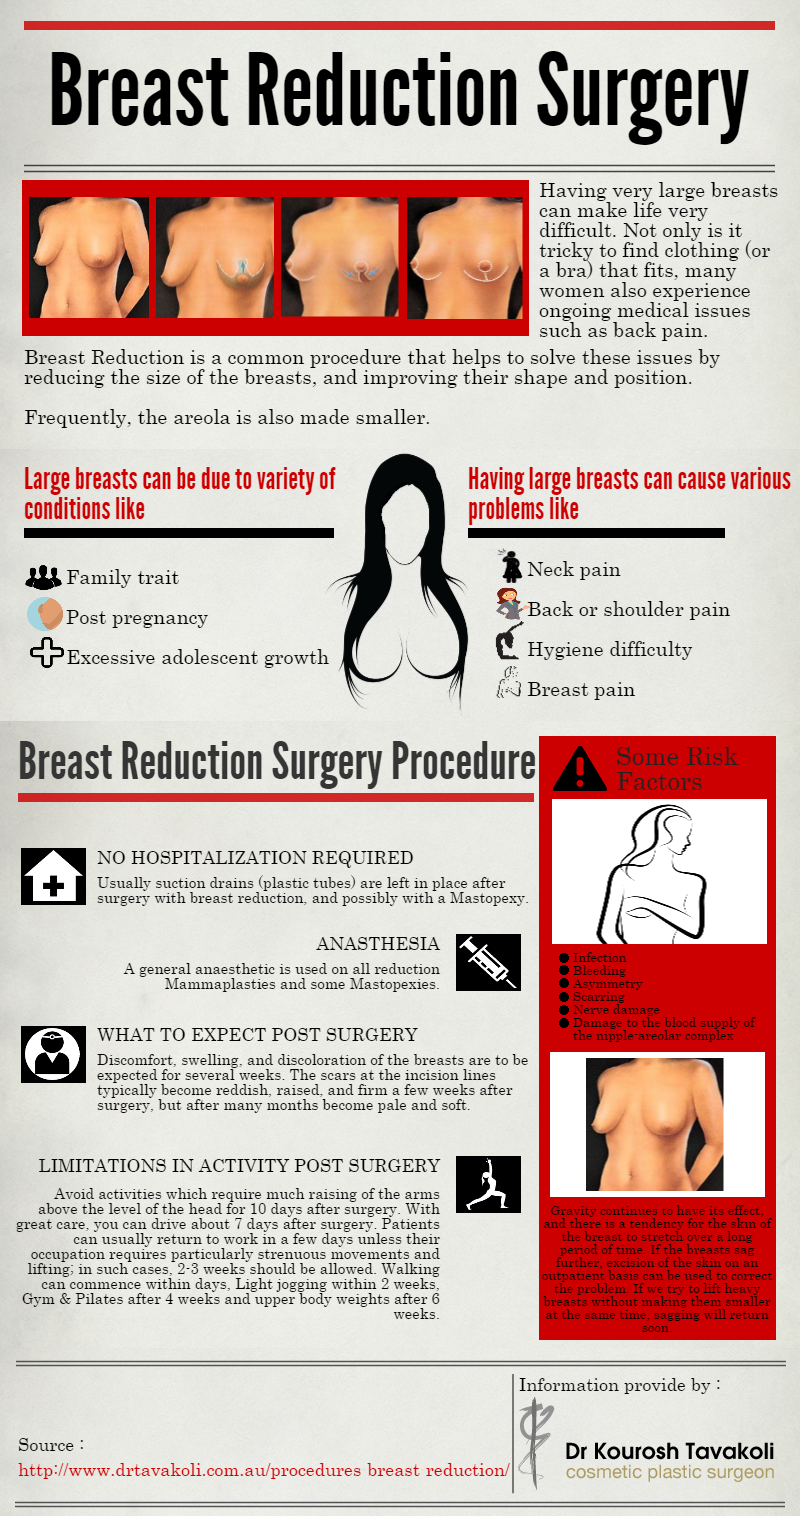 Breast reduction Australia: Women with very large breasts face